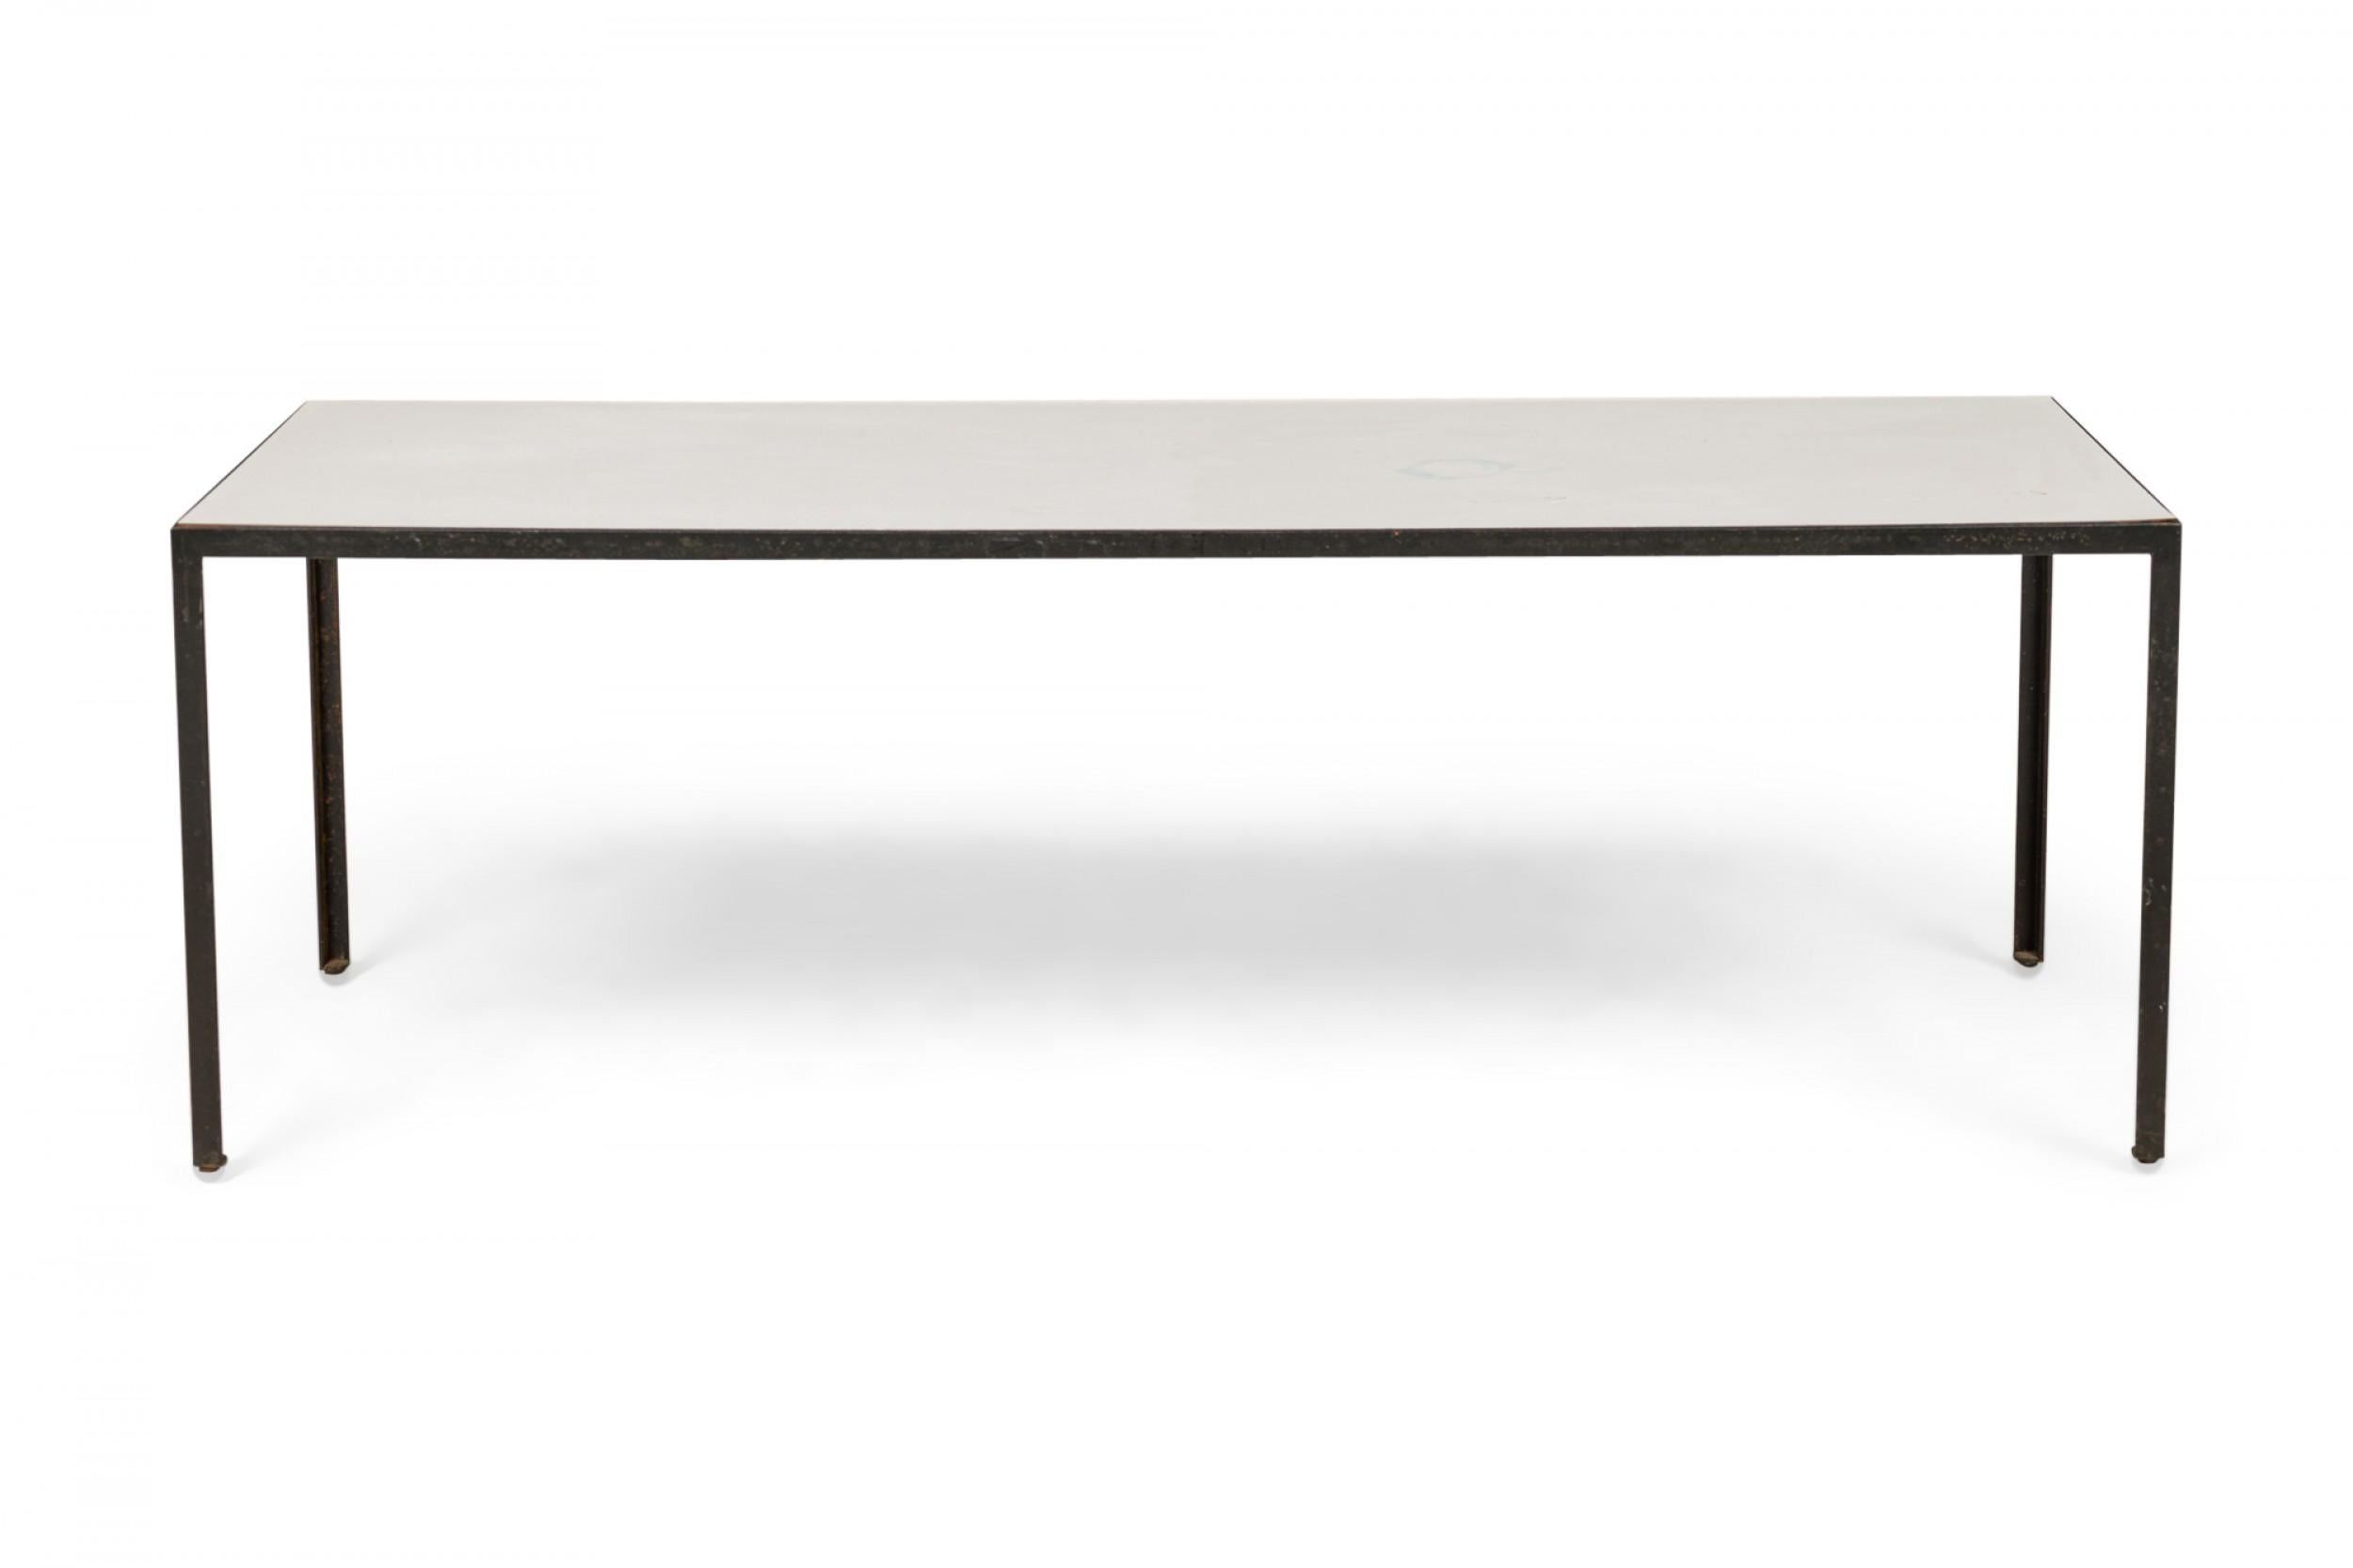 American Mid-Century rectangular coffee / cocktail table with a white laminate top resting on a minimalist black steel base. (GEORGE NELSON / HERMAN MILLER)
